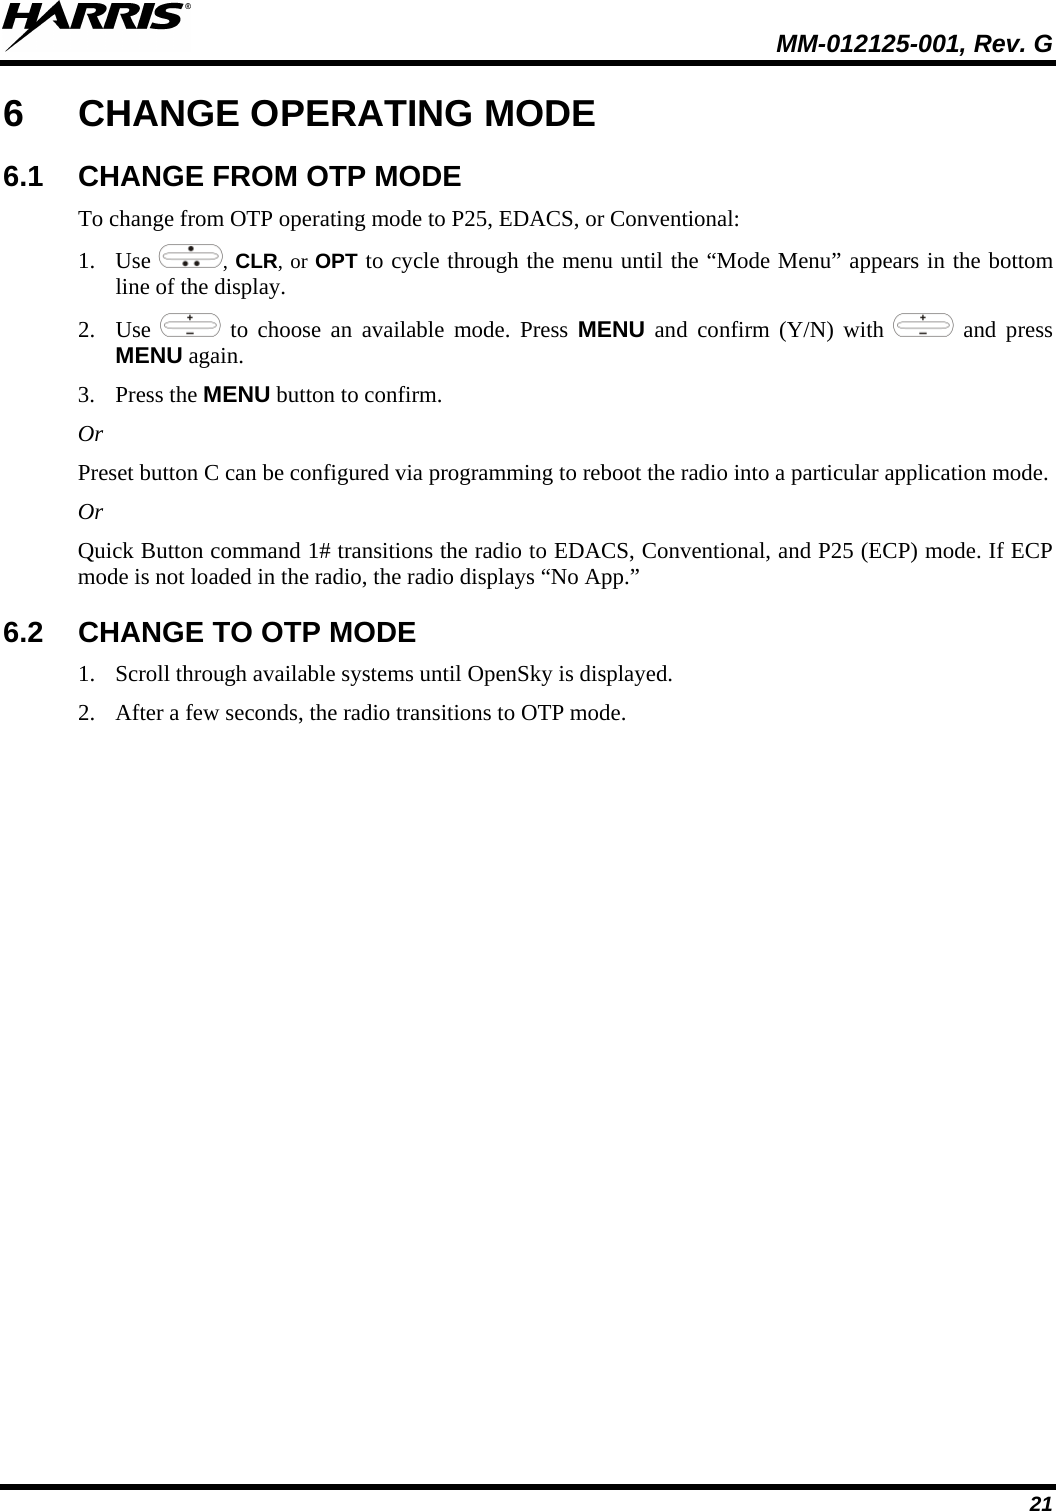  MM-012125-001, Rev. G 21 6  CHANGE OPERATING MODE 6.1 CHANGE FROM OTP MODE To change from OTP operating mode to P25, EDACS, or Conventional: 1. Use  , CLR, or OPT to cycle through the menu until the “Mode Menu” appears in the bottom line of the display. 2. Use   to choose an available mode. Press MENU and confirm (Y/N) with   and press MENU again. 3. Press the MENU button to confirm.  Or Preset button C can be configured via programming to reboot the radio into a particular application mode. Or Quick Button command 1# transitions the radio to EDACS, Conventional, and P25 (ECP) mode. If ECP mode is not loaded in the radio, the radio displays “No App.” 6.2 CHANGE TO OTP MODE 1. Scroll through available systems until OpenSky is displayed.  2. After a few seconds, the radio transitions to OTP mode. 